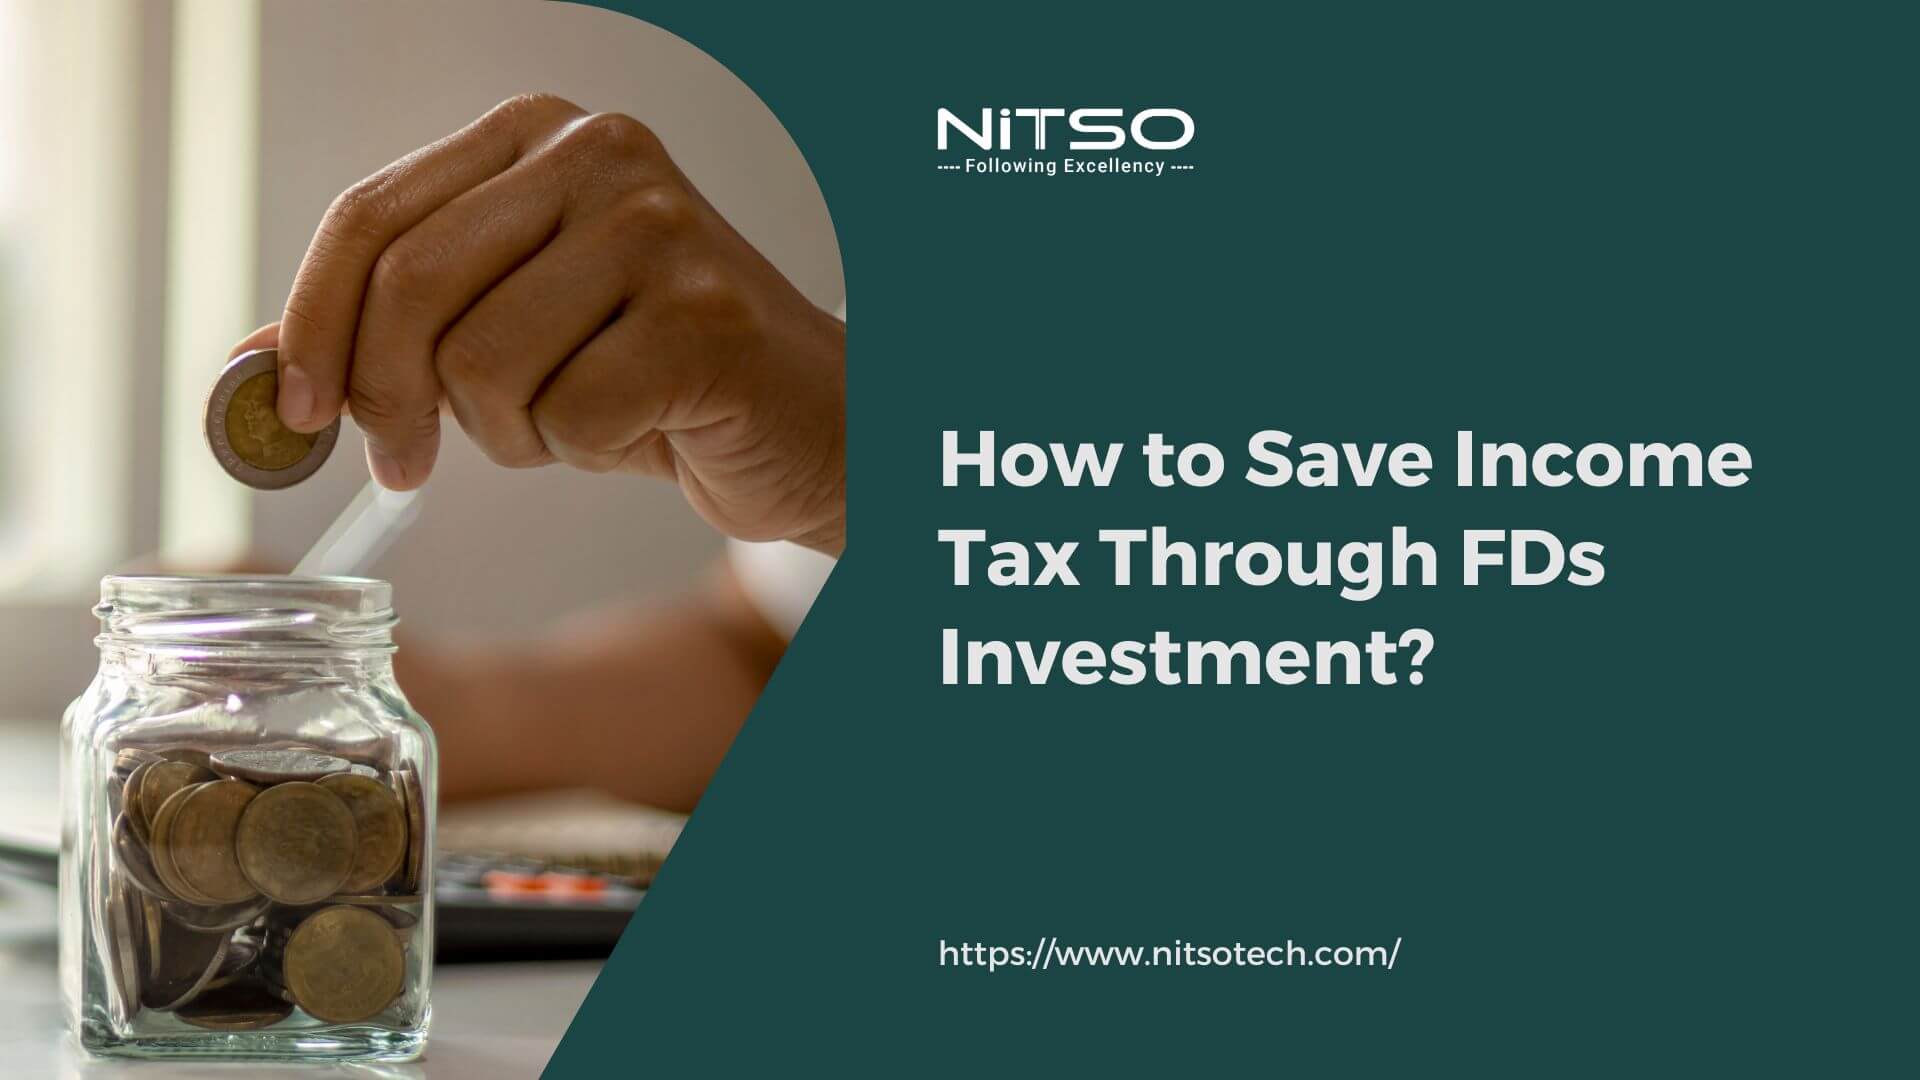 How to Save Income Tax Through FDs Investment?